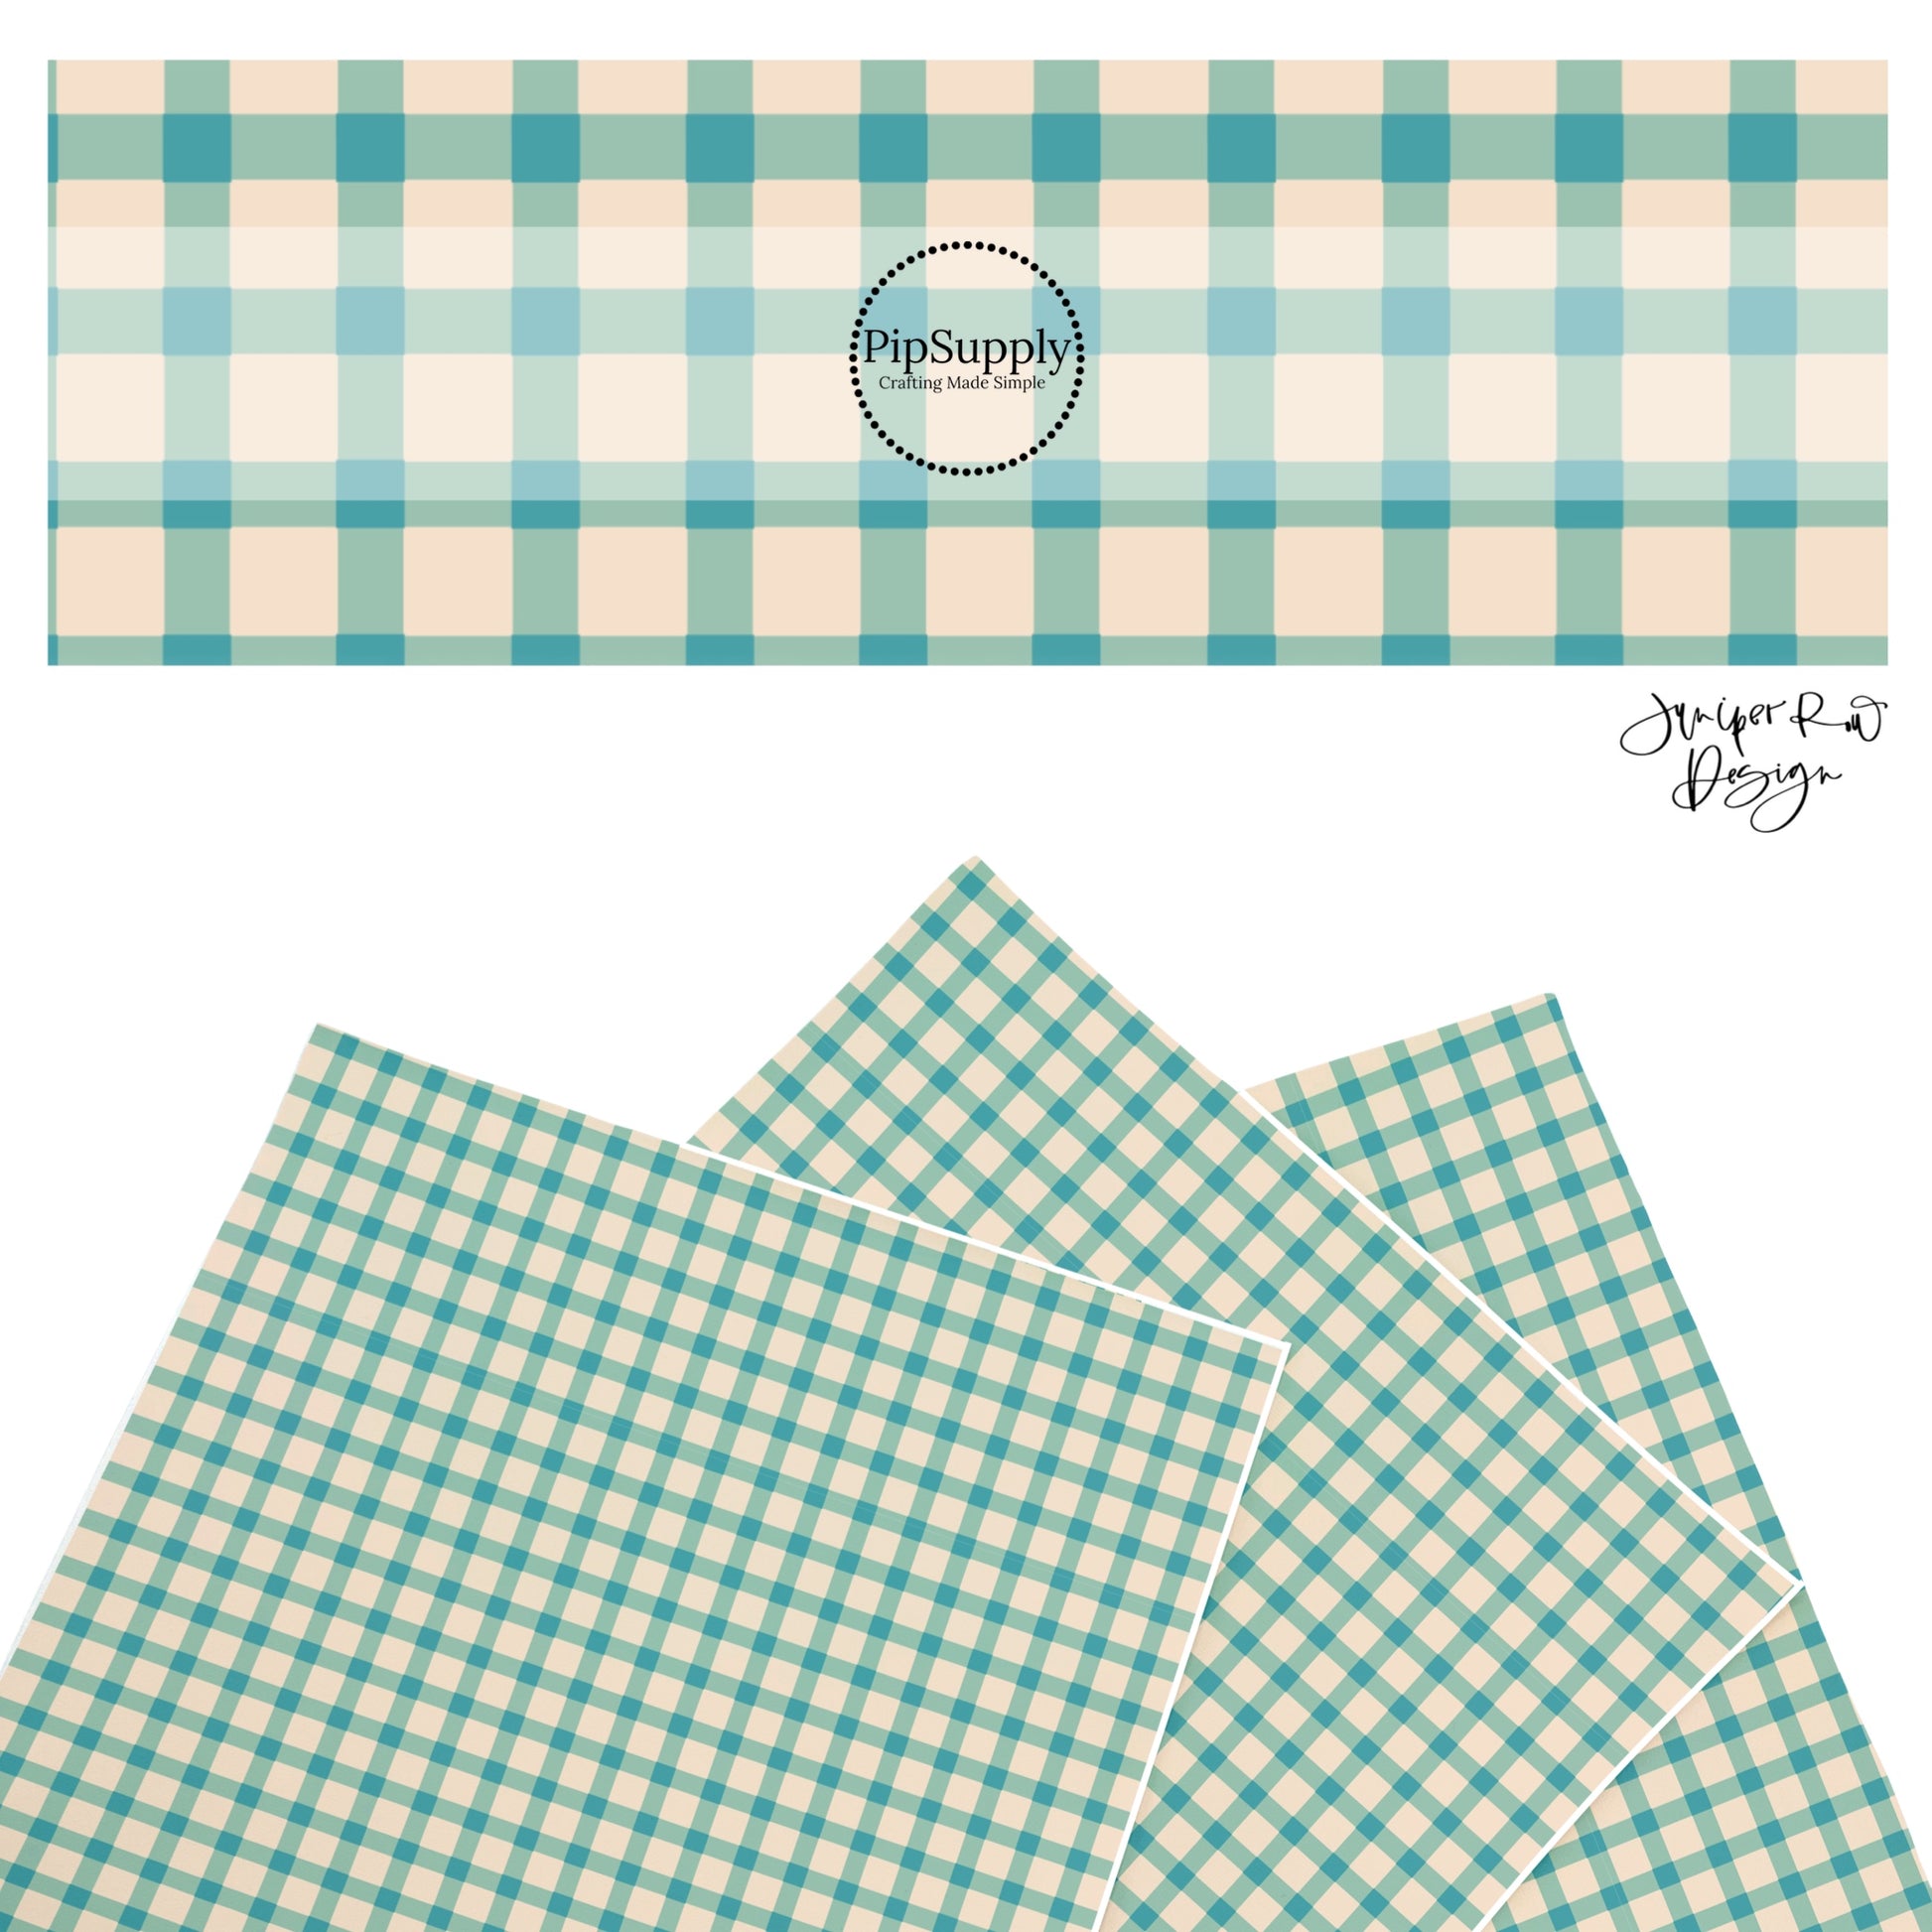 These summer faux leather sheets contain the following design elements: summer haze teal and cream plaid pattern. Our CPSIA compliant faux leather sheets or rolls can be used for all types of crafting projects.